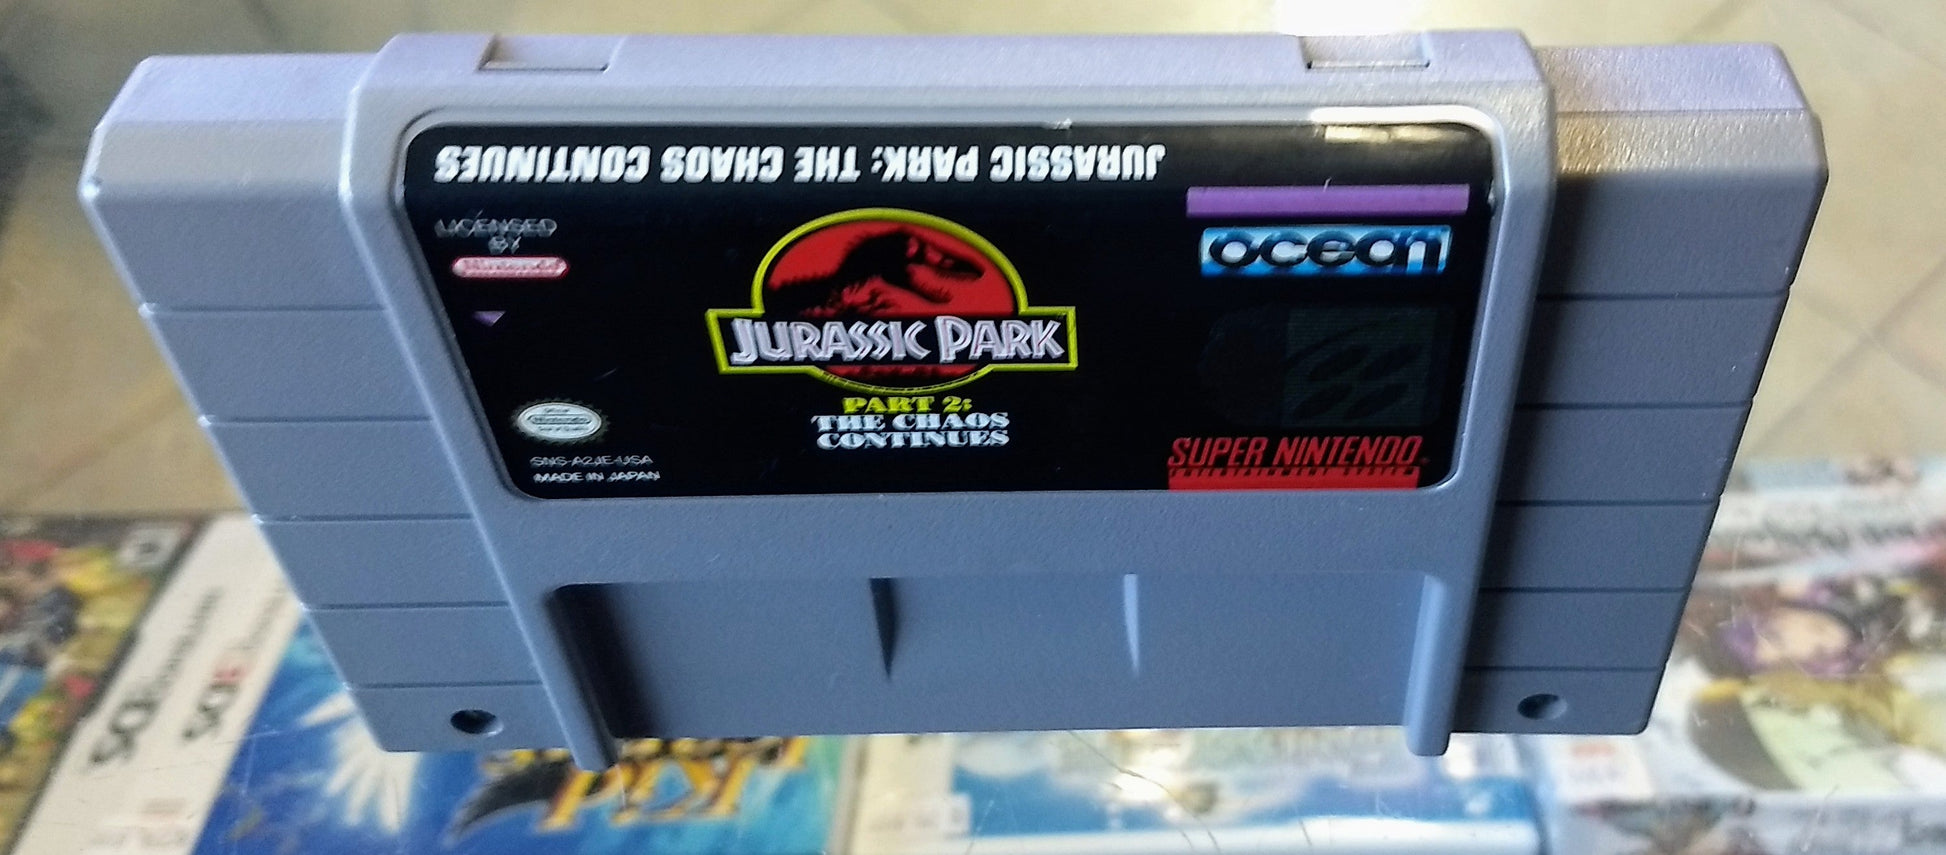 JURASSIC PARK 2 THE CHAOS CONTINUES (SUPER NINTENDO SNES) - jeux video game-x